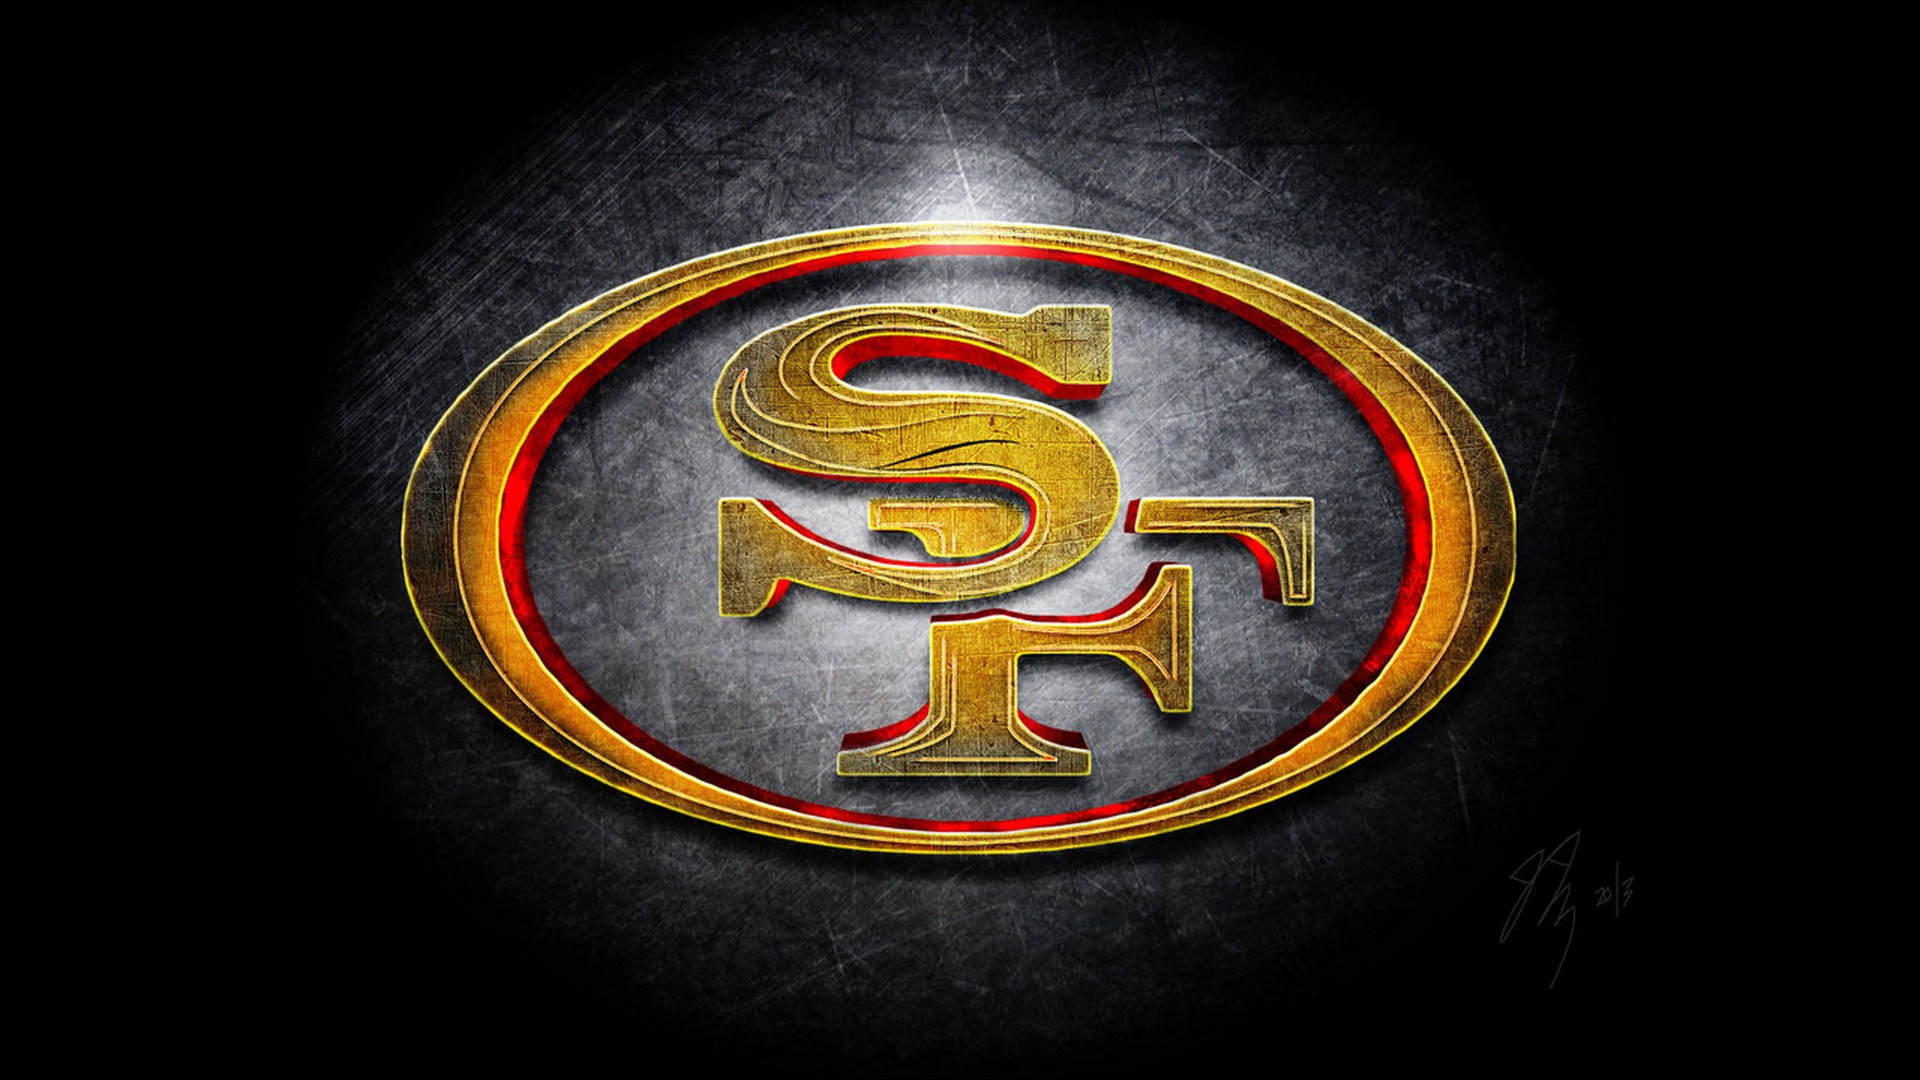 San Francisco 49ers Desktop Wallpaper With high-resolution 1920X1080 pixel. You can use this wallpaper for your Mac or Windows Desktop Background, iPhone, Android or Tablet and another Smartphone device